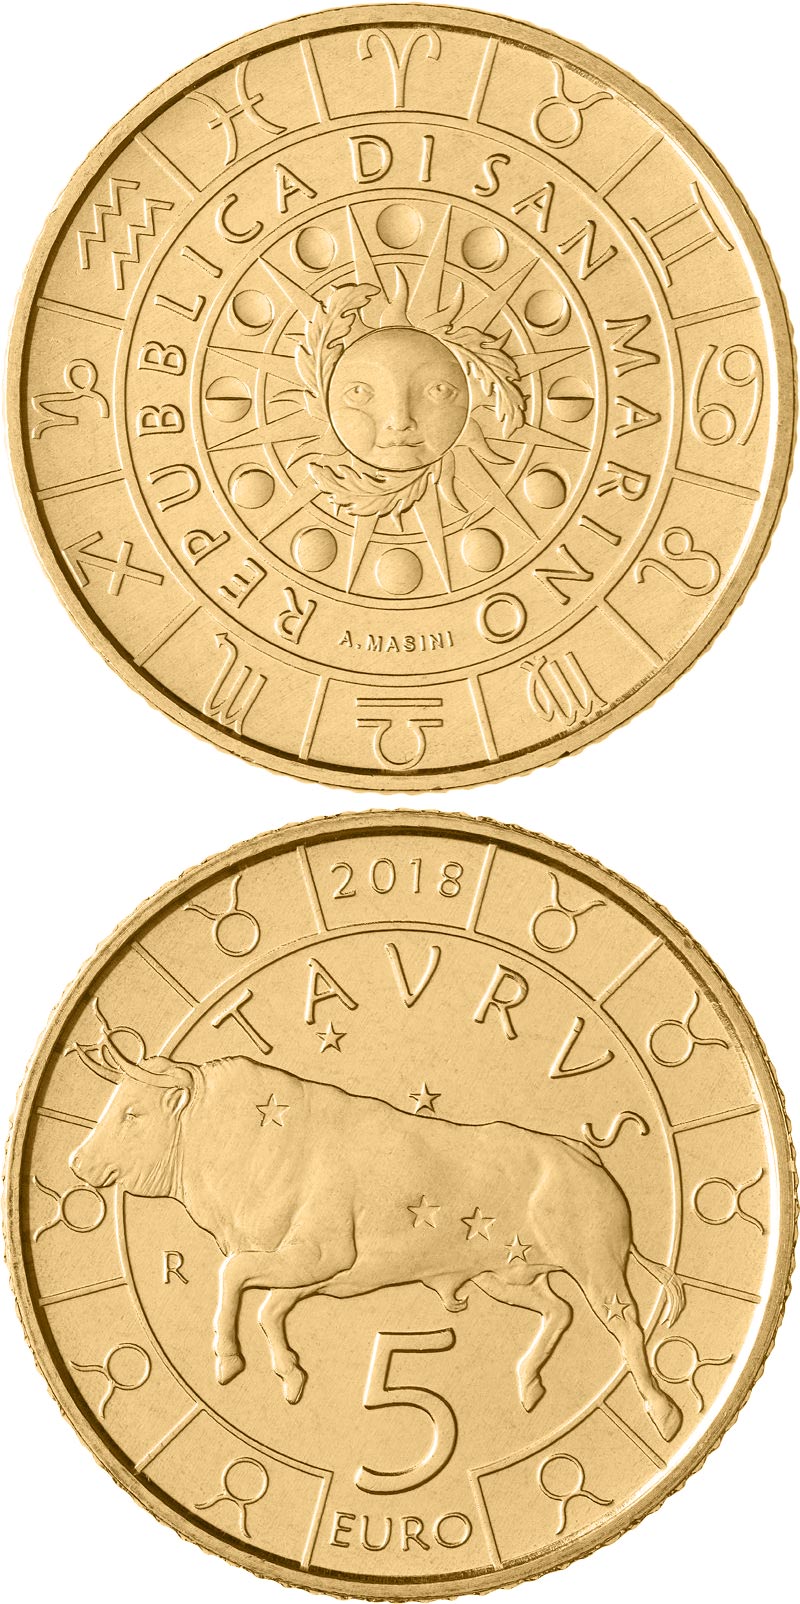 Image of 5 euro coin - Taurus | San Marino 2018.  The Bronze coin is of UNC quality.